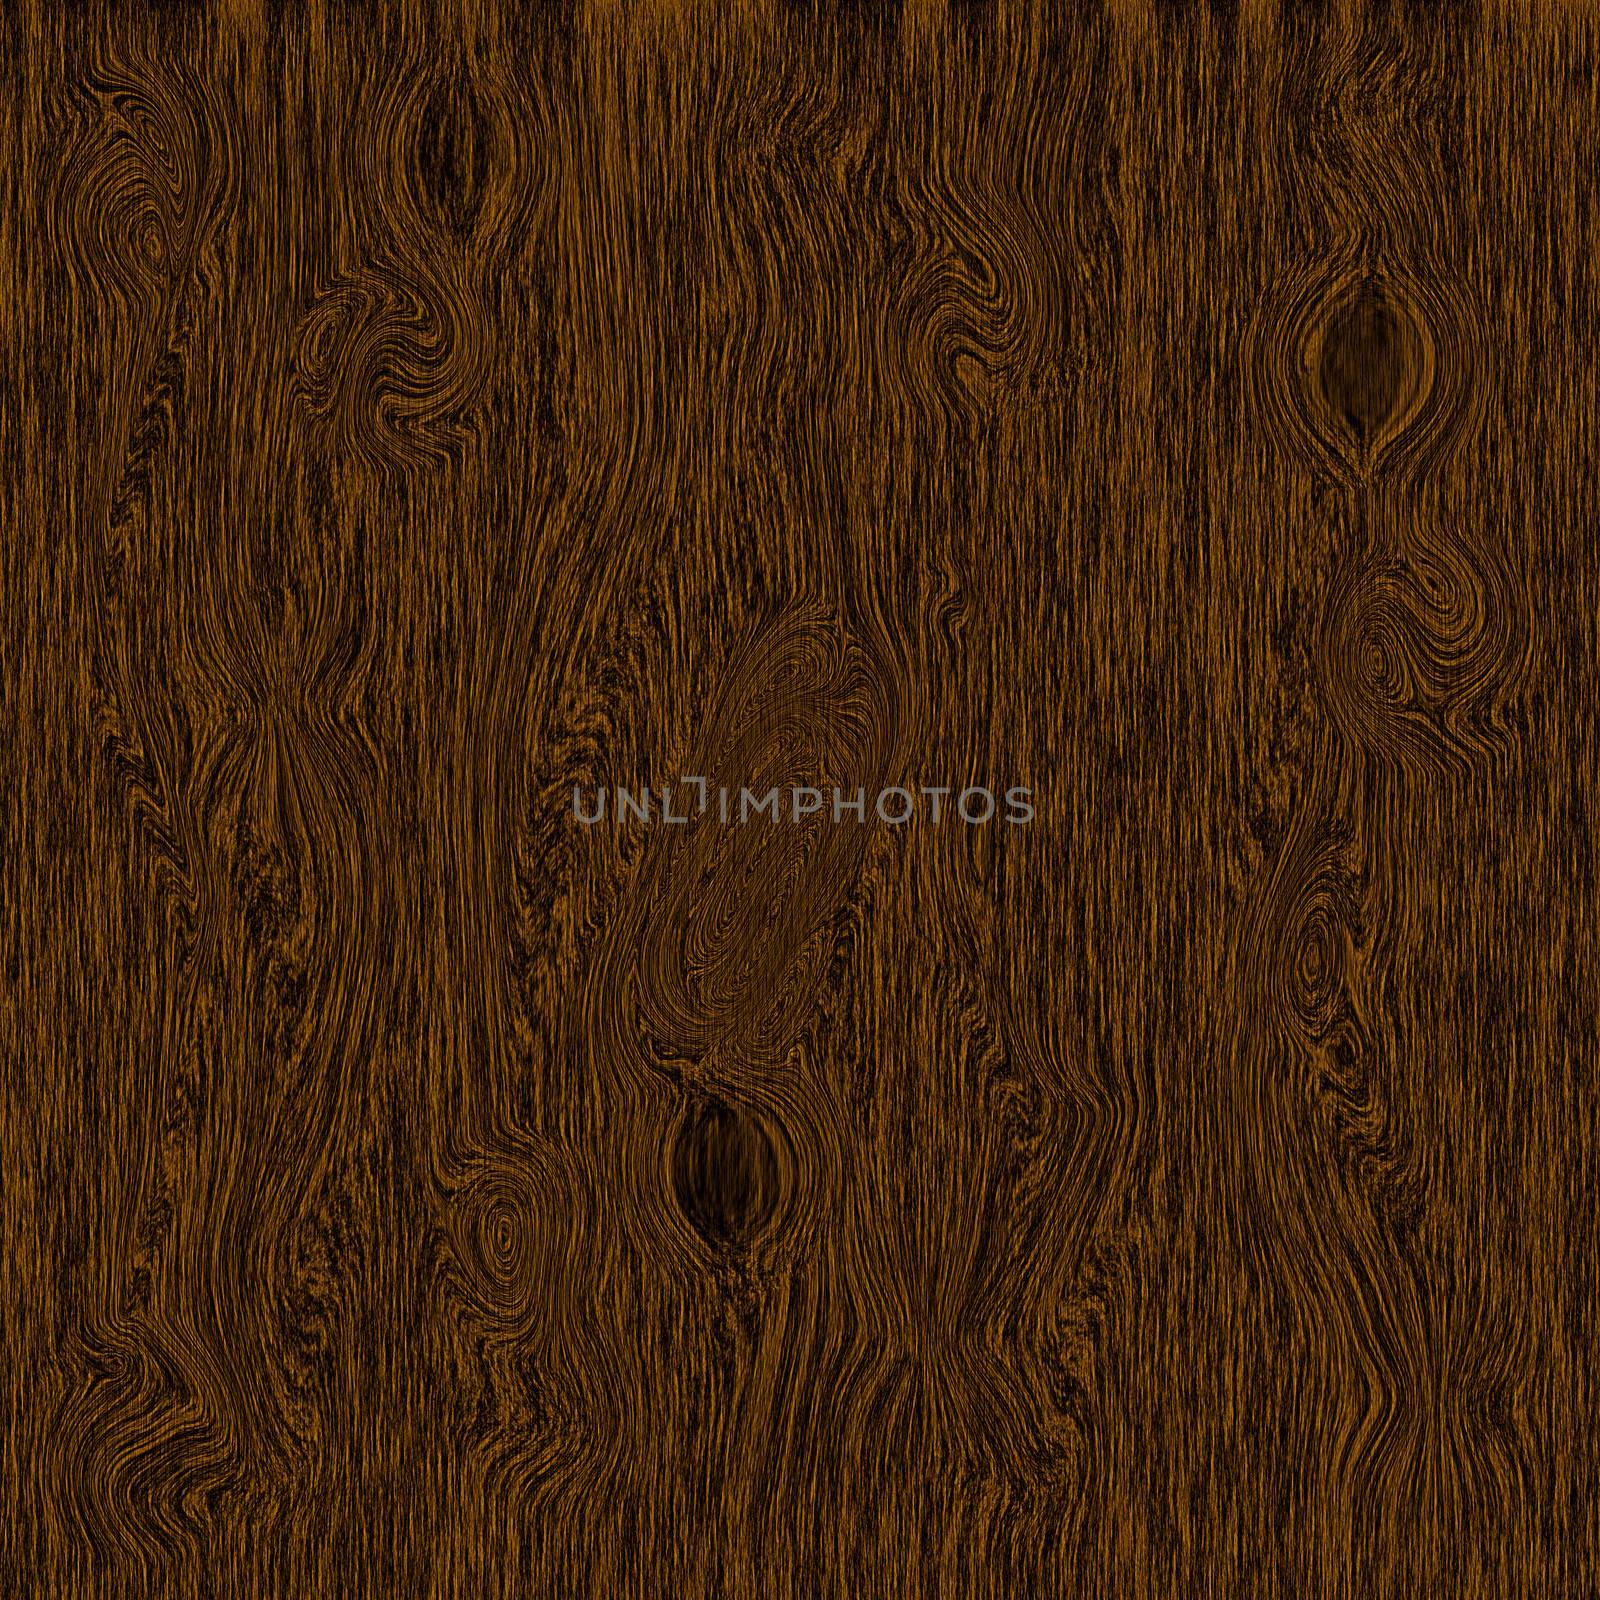 The Design of Wood Grain Background Wall by Photoshop